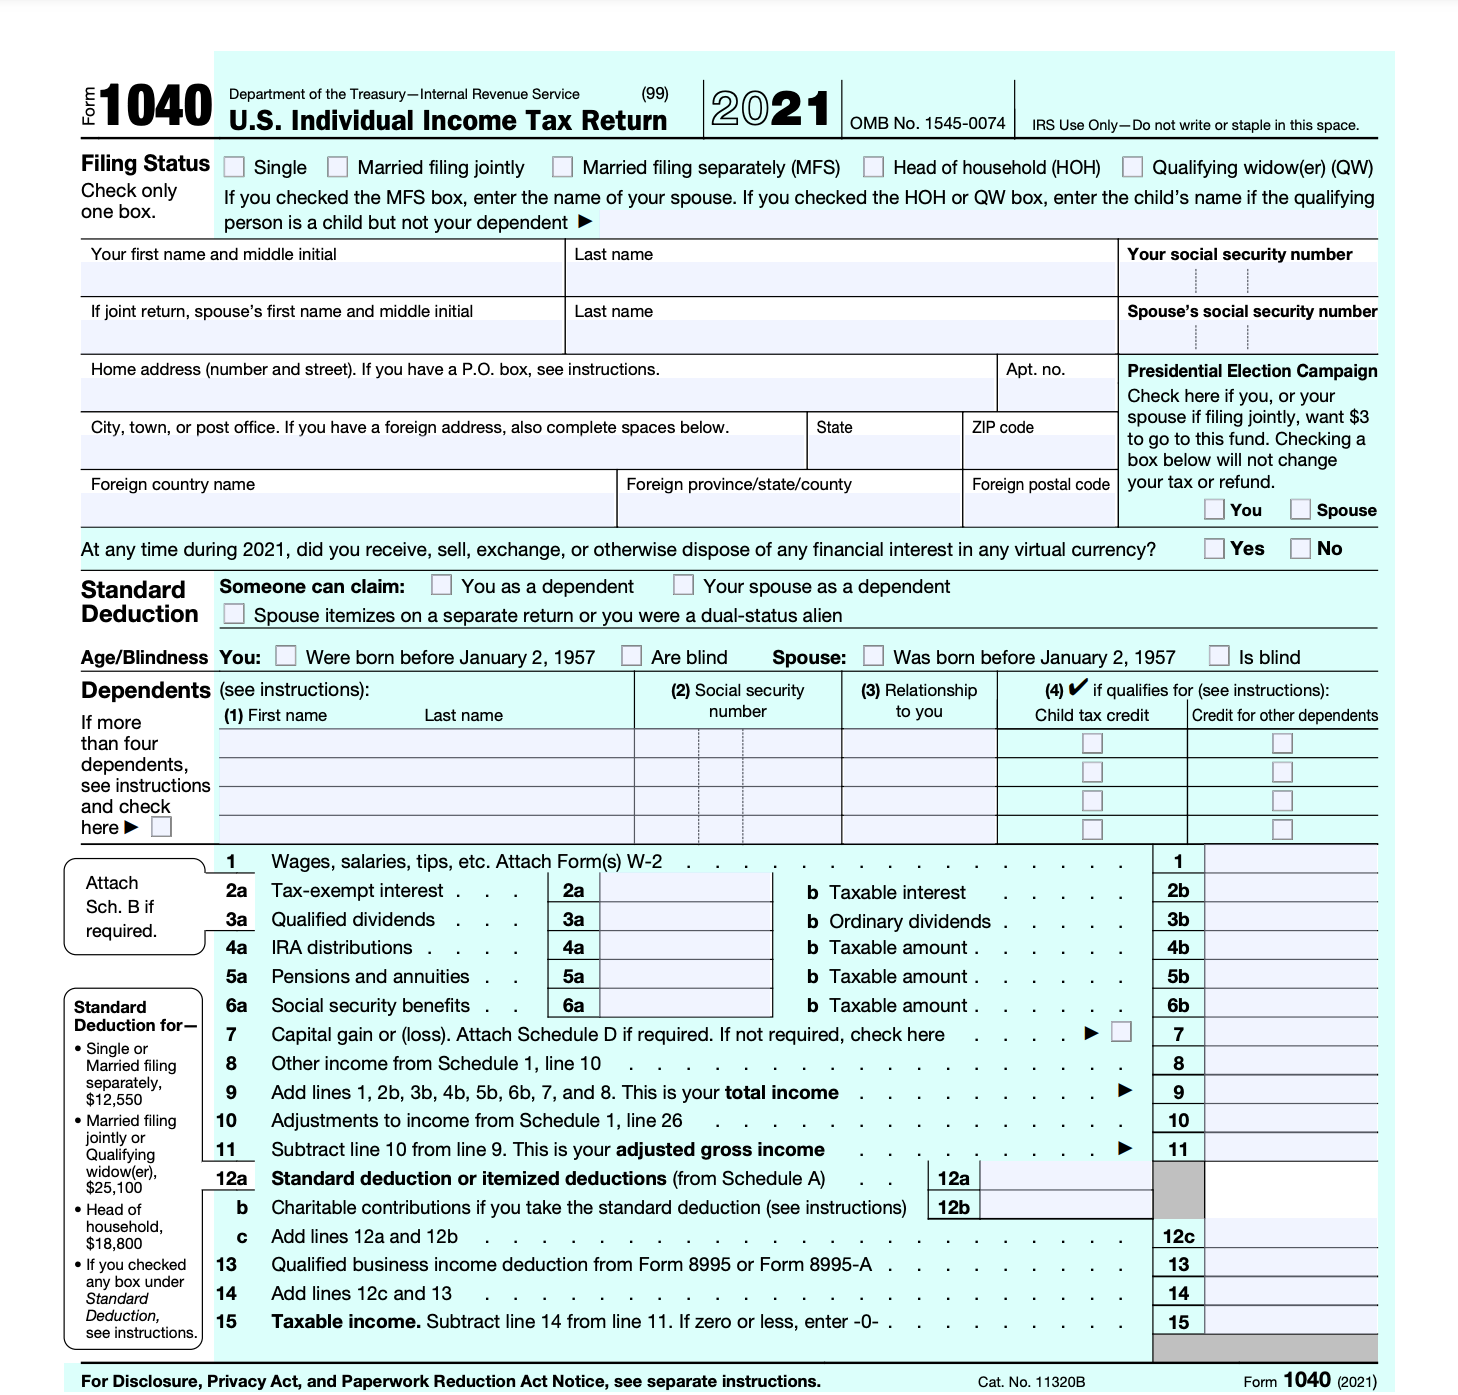 where is your income tax on 1040 form